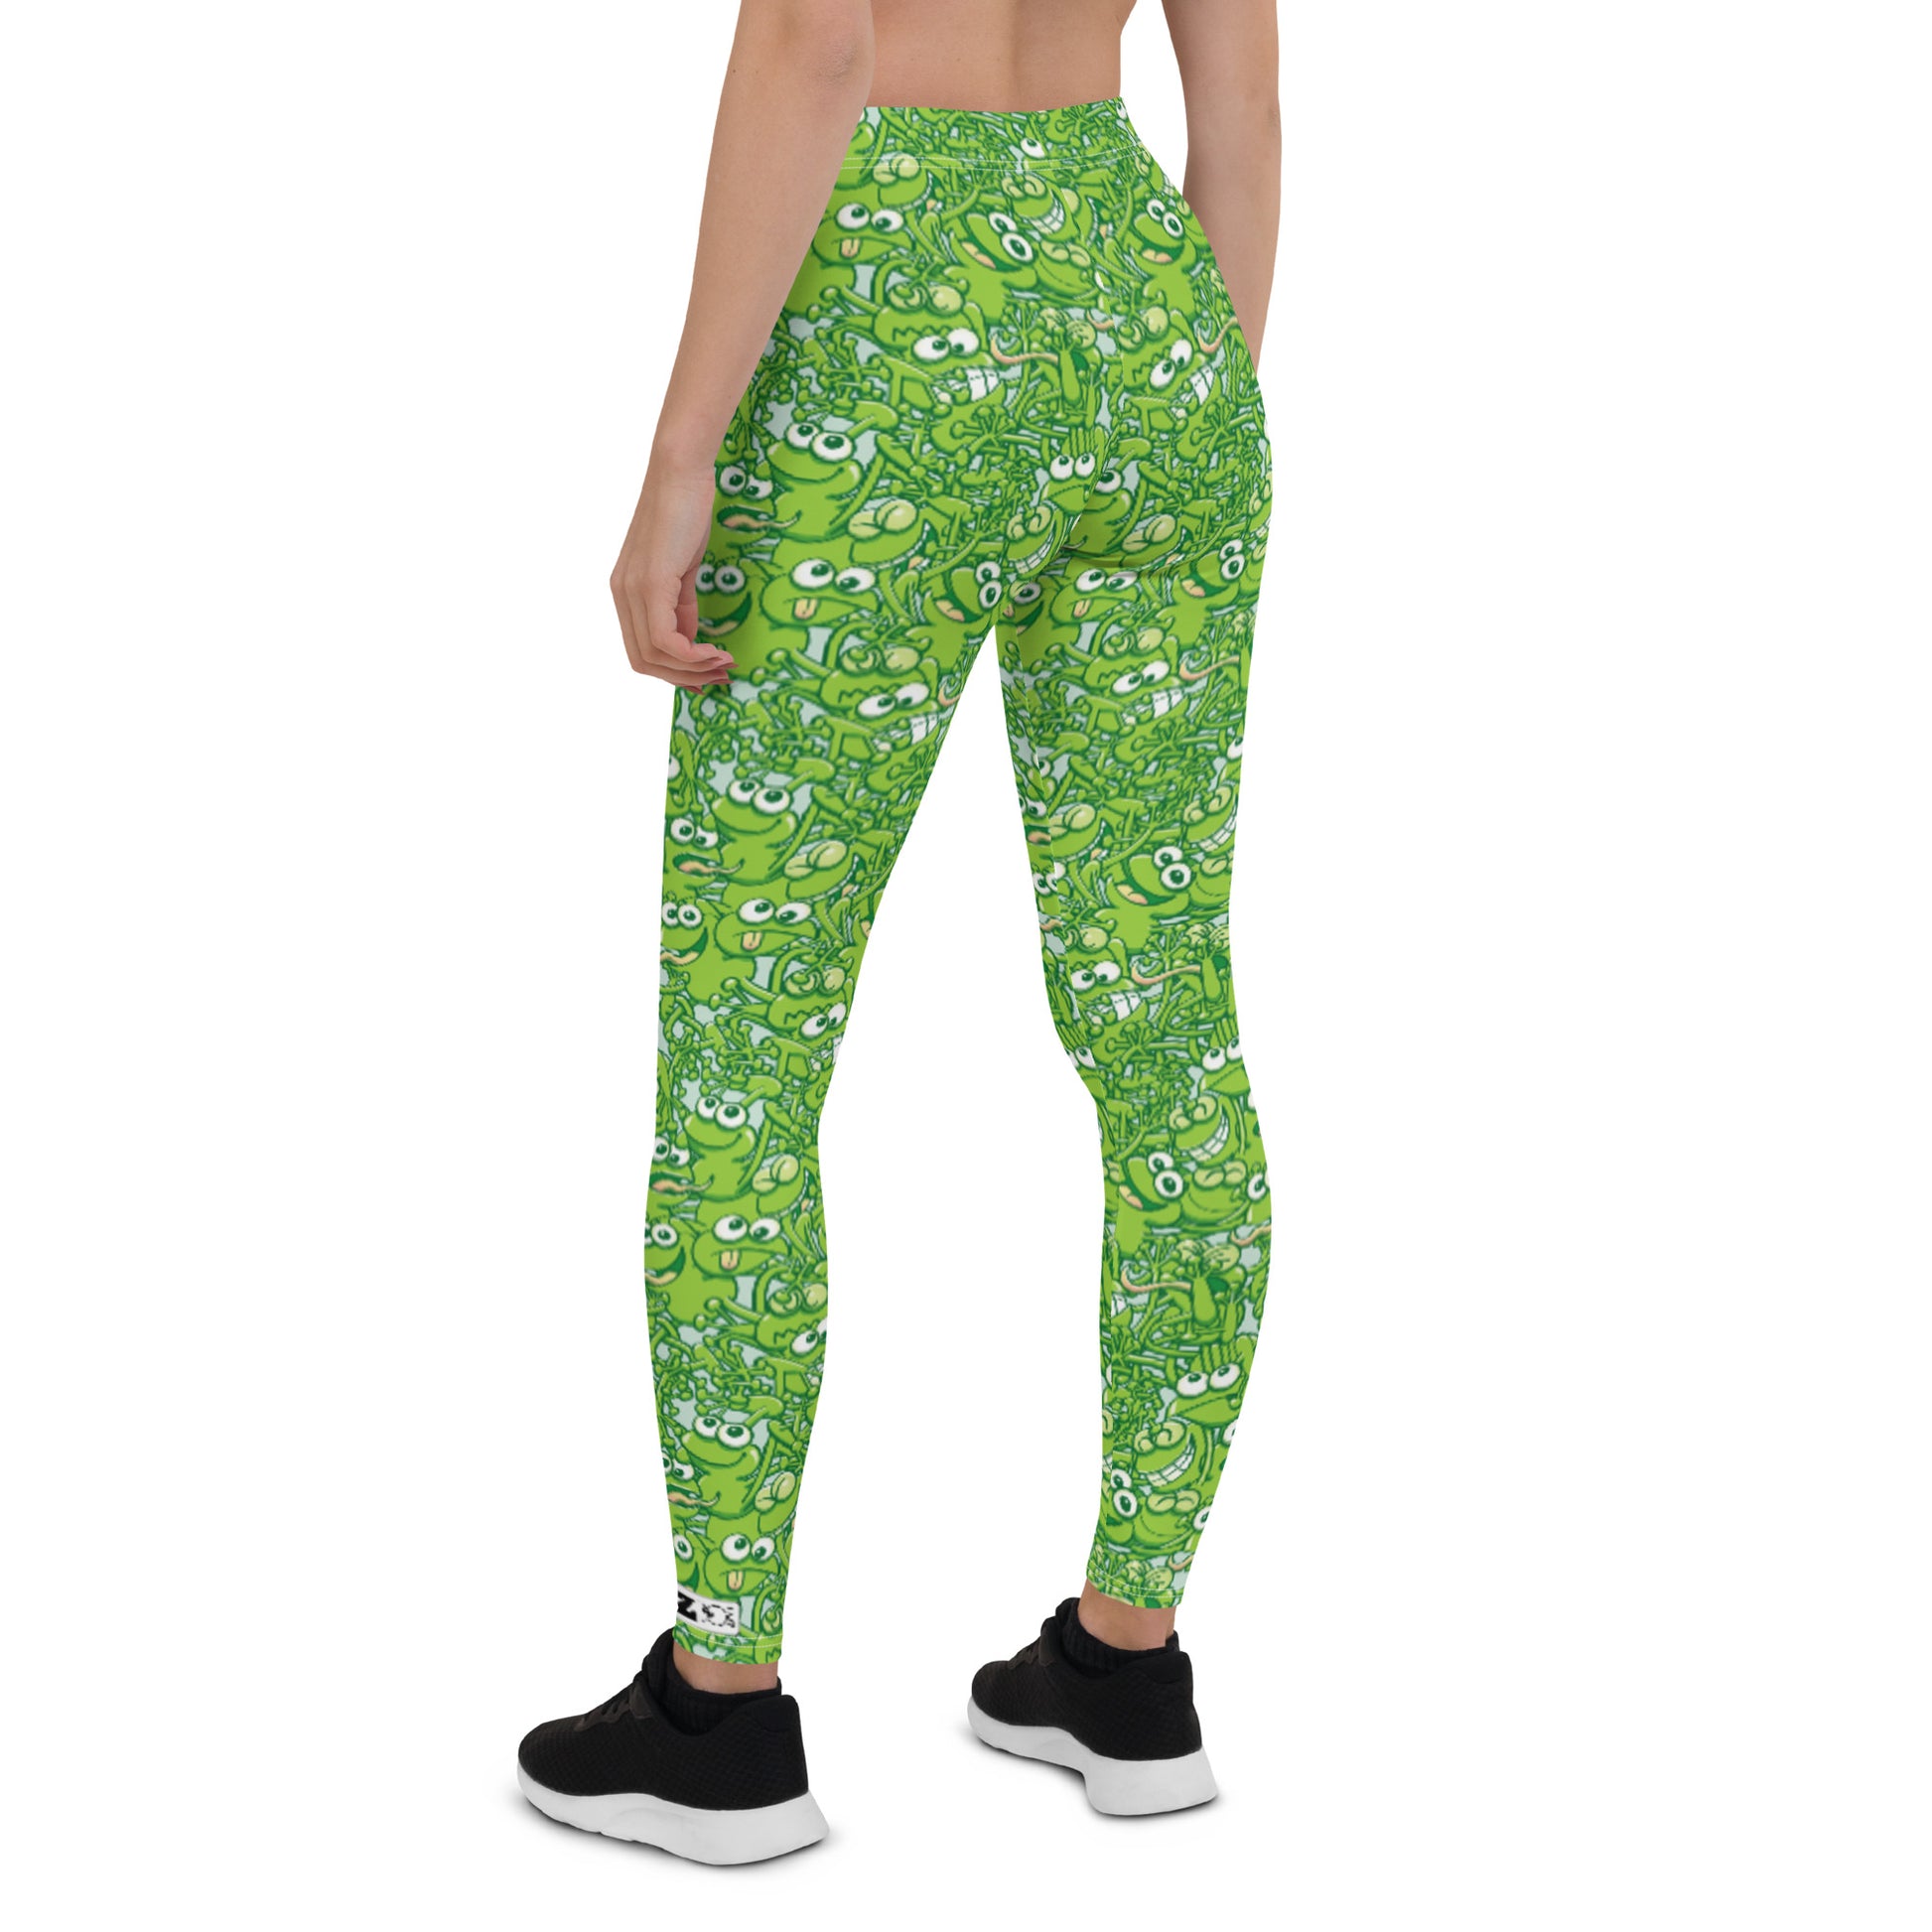 A tangled army of happy green frogs appears when the rain stops Leggings. Back view